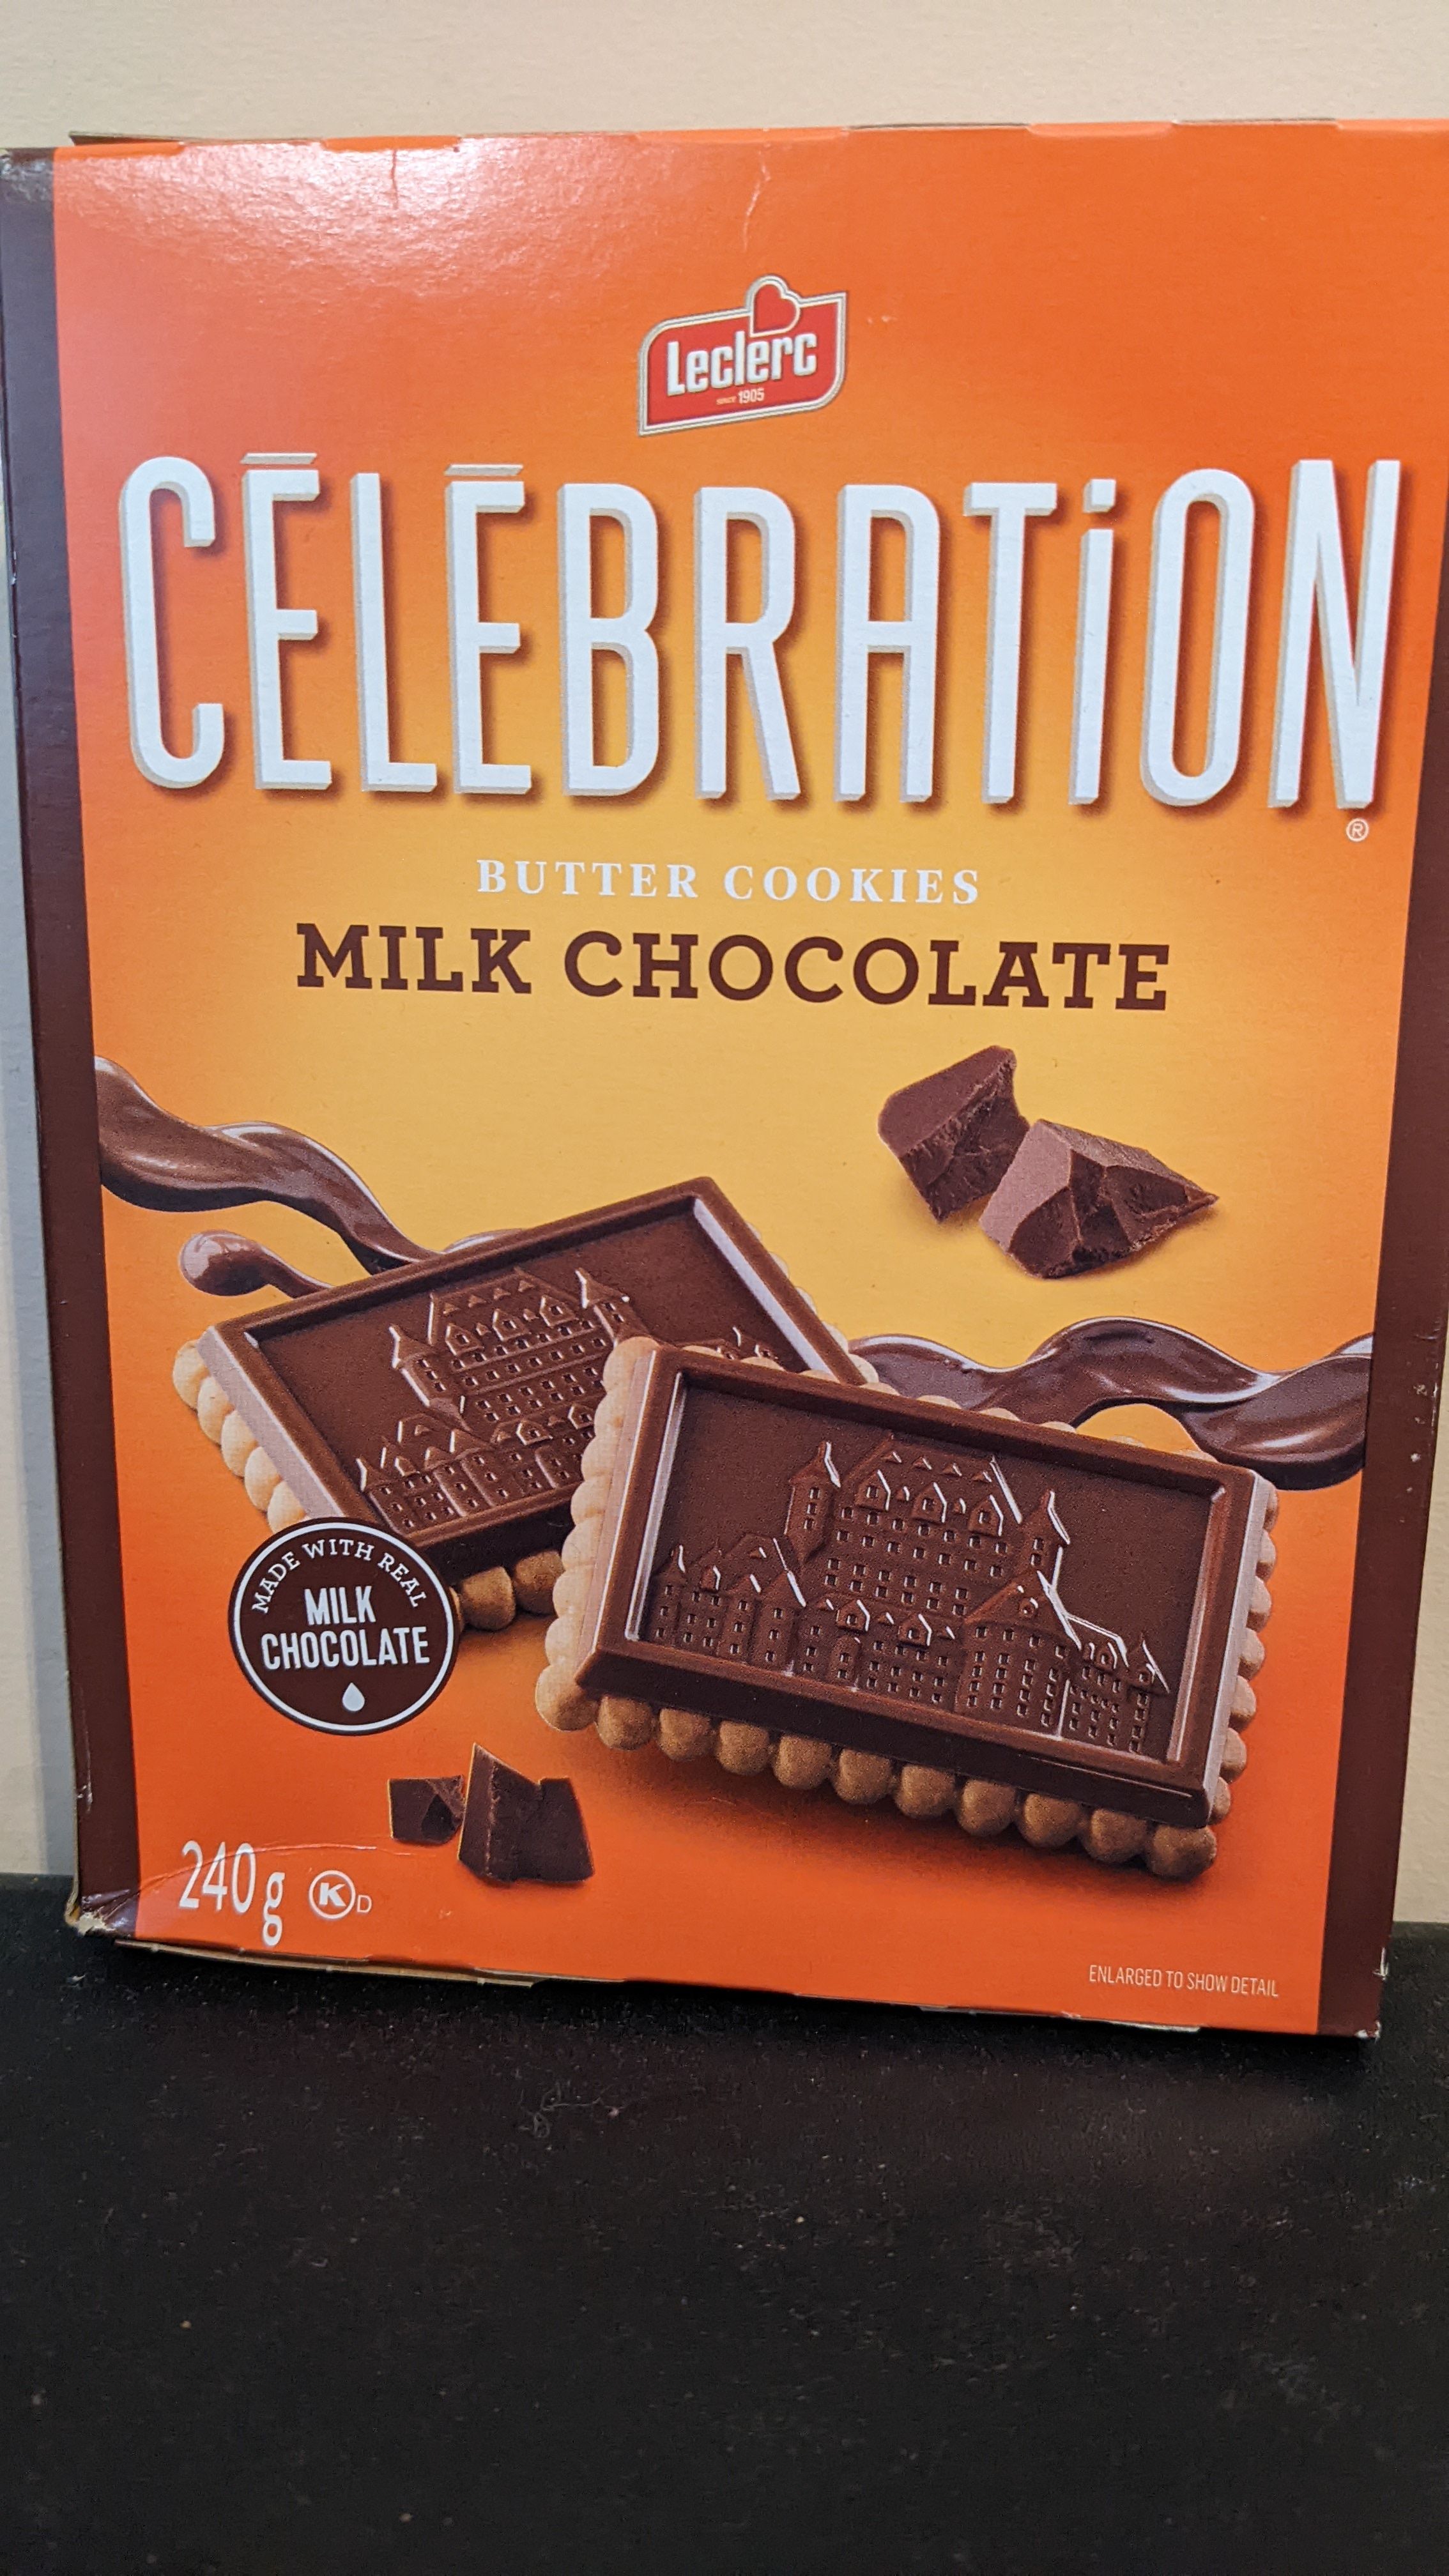 A box for Celebration Milk Chocolate cookies